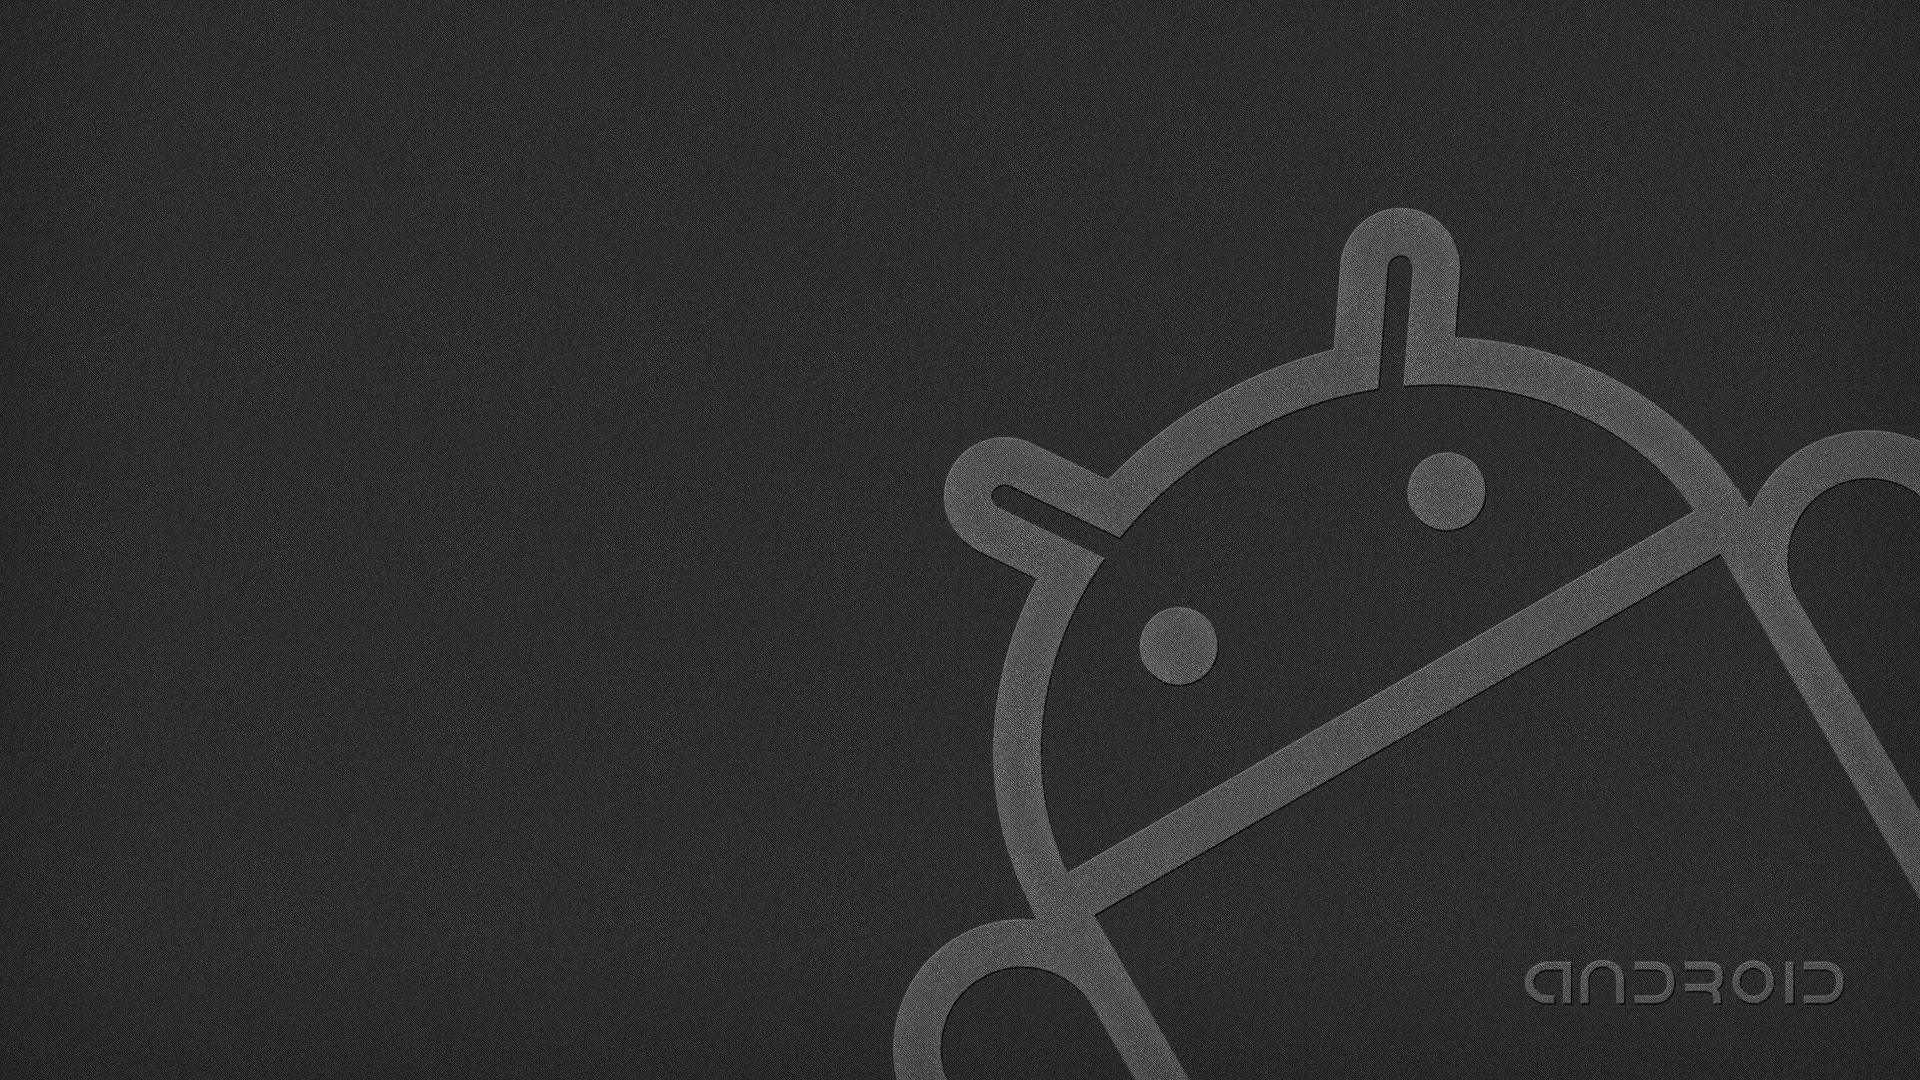 Android-logo-wallpaper-1920×1080 | wallpapers55.com - Best ...